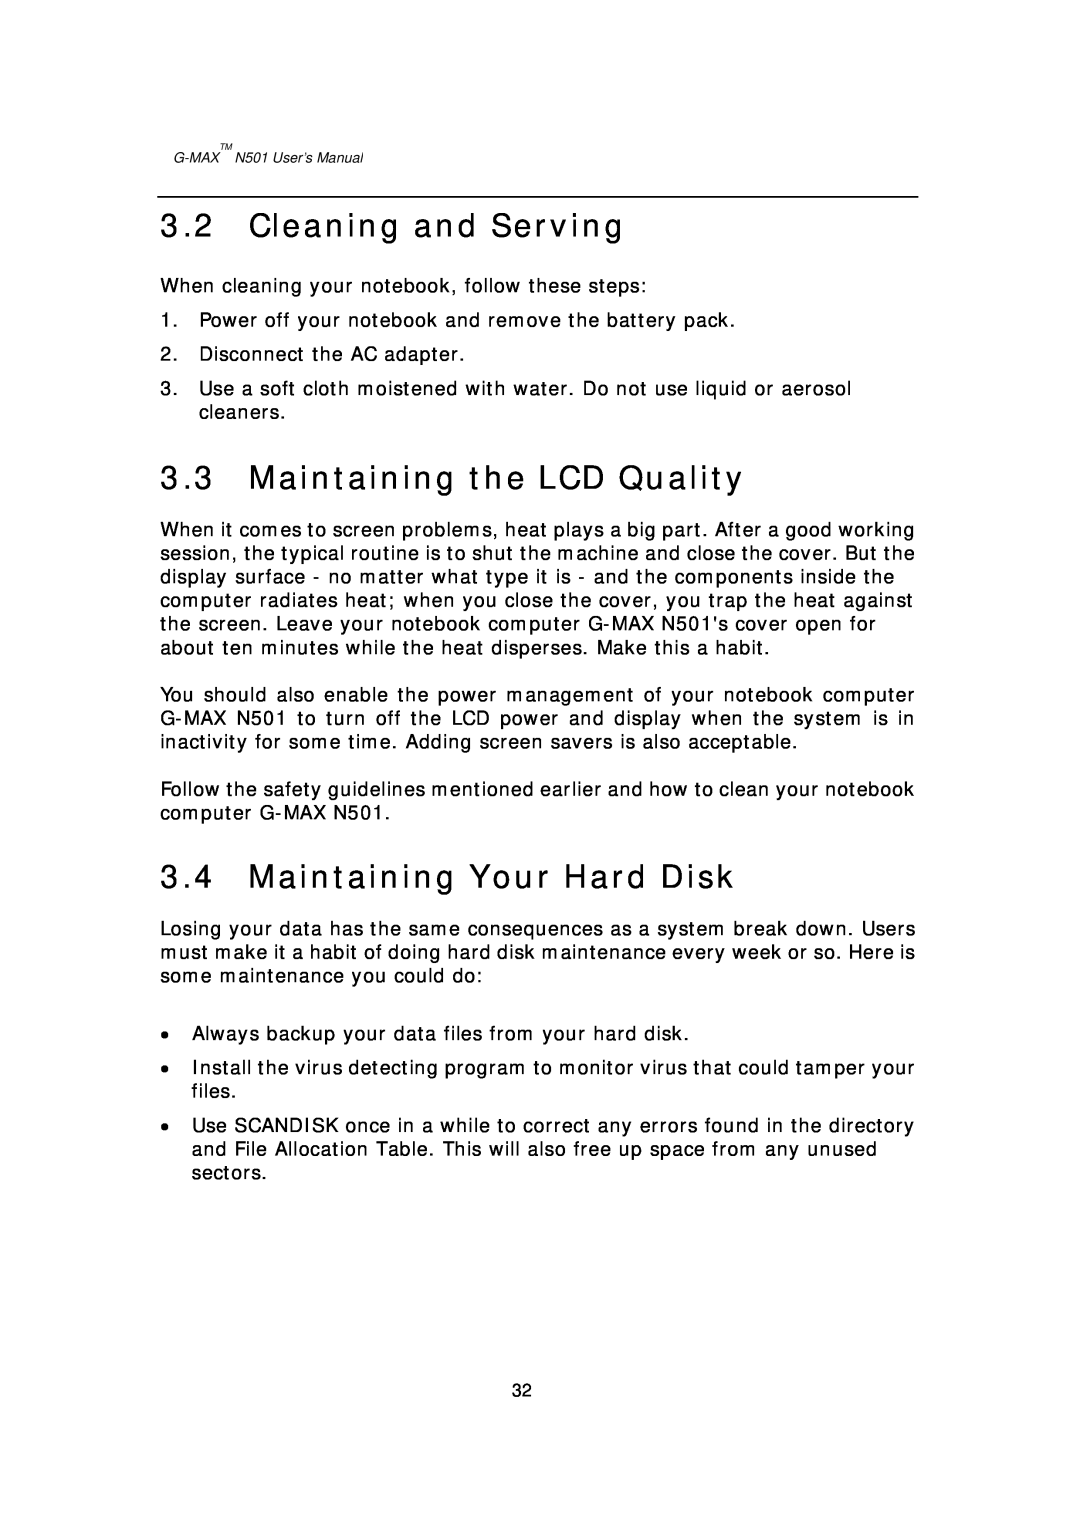 Gigabyte G-MAX N501 user manual Cleaning and Serving, Maintaining the LCD Quality, Maintaining Your Hard Disk 